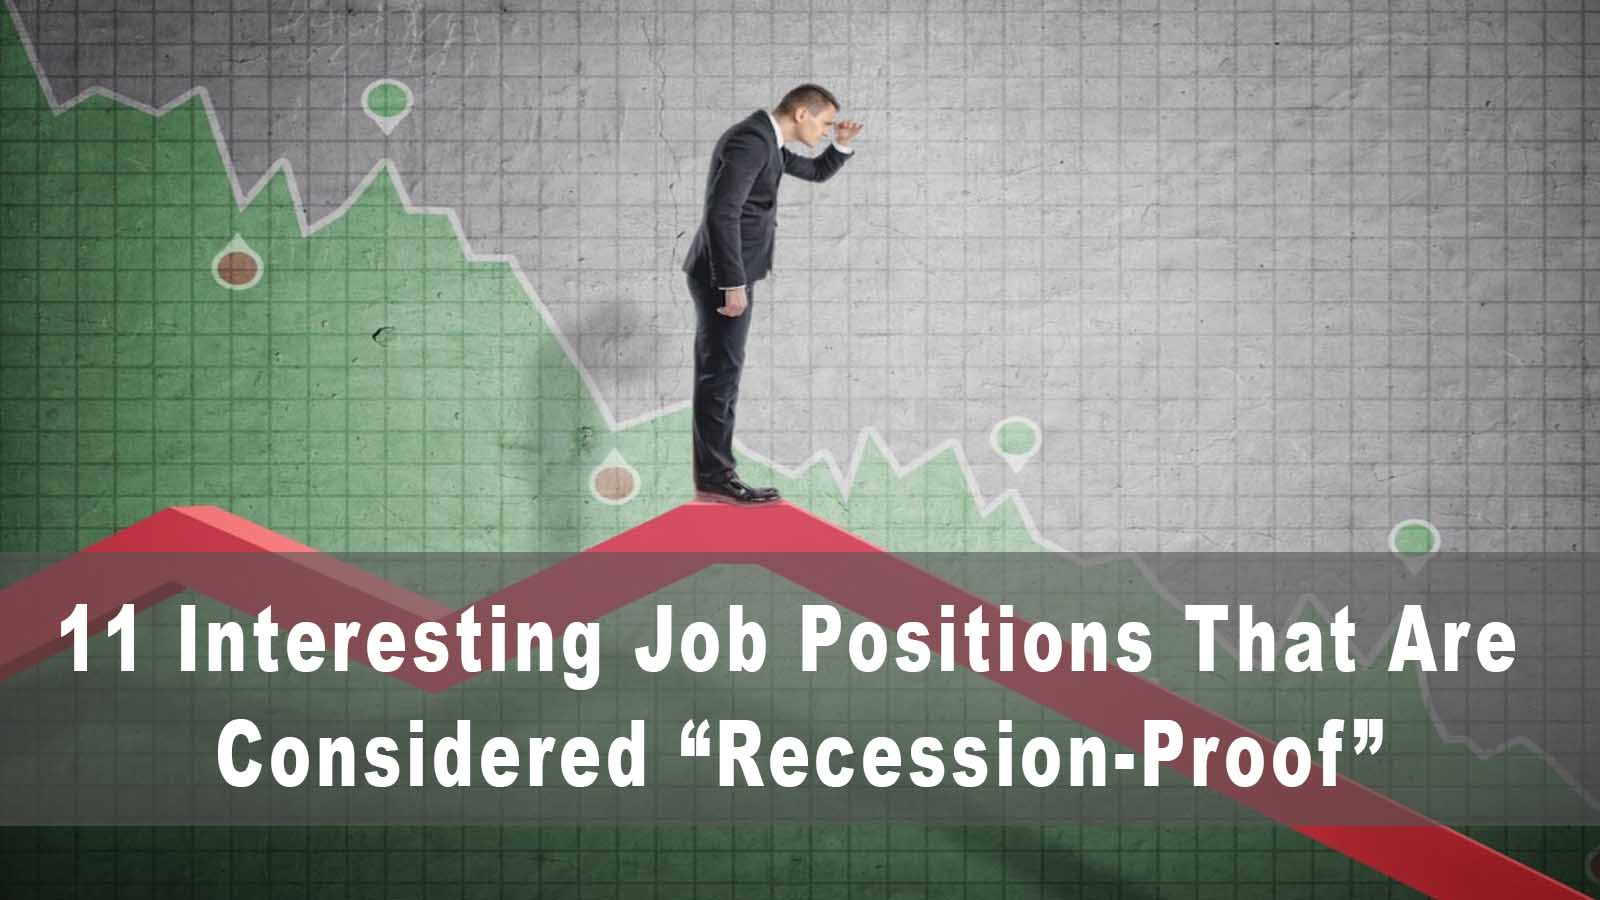 11 Interesting Job Positions That Are Considered “Recession-Proof”